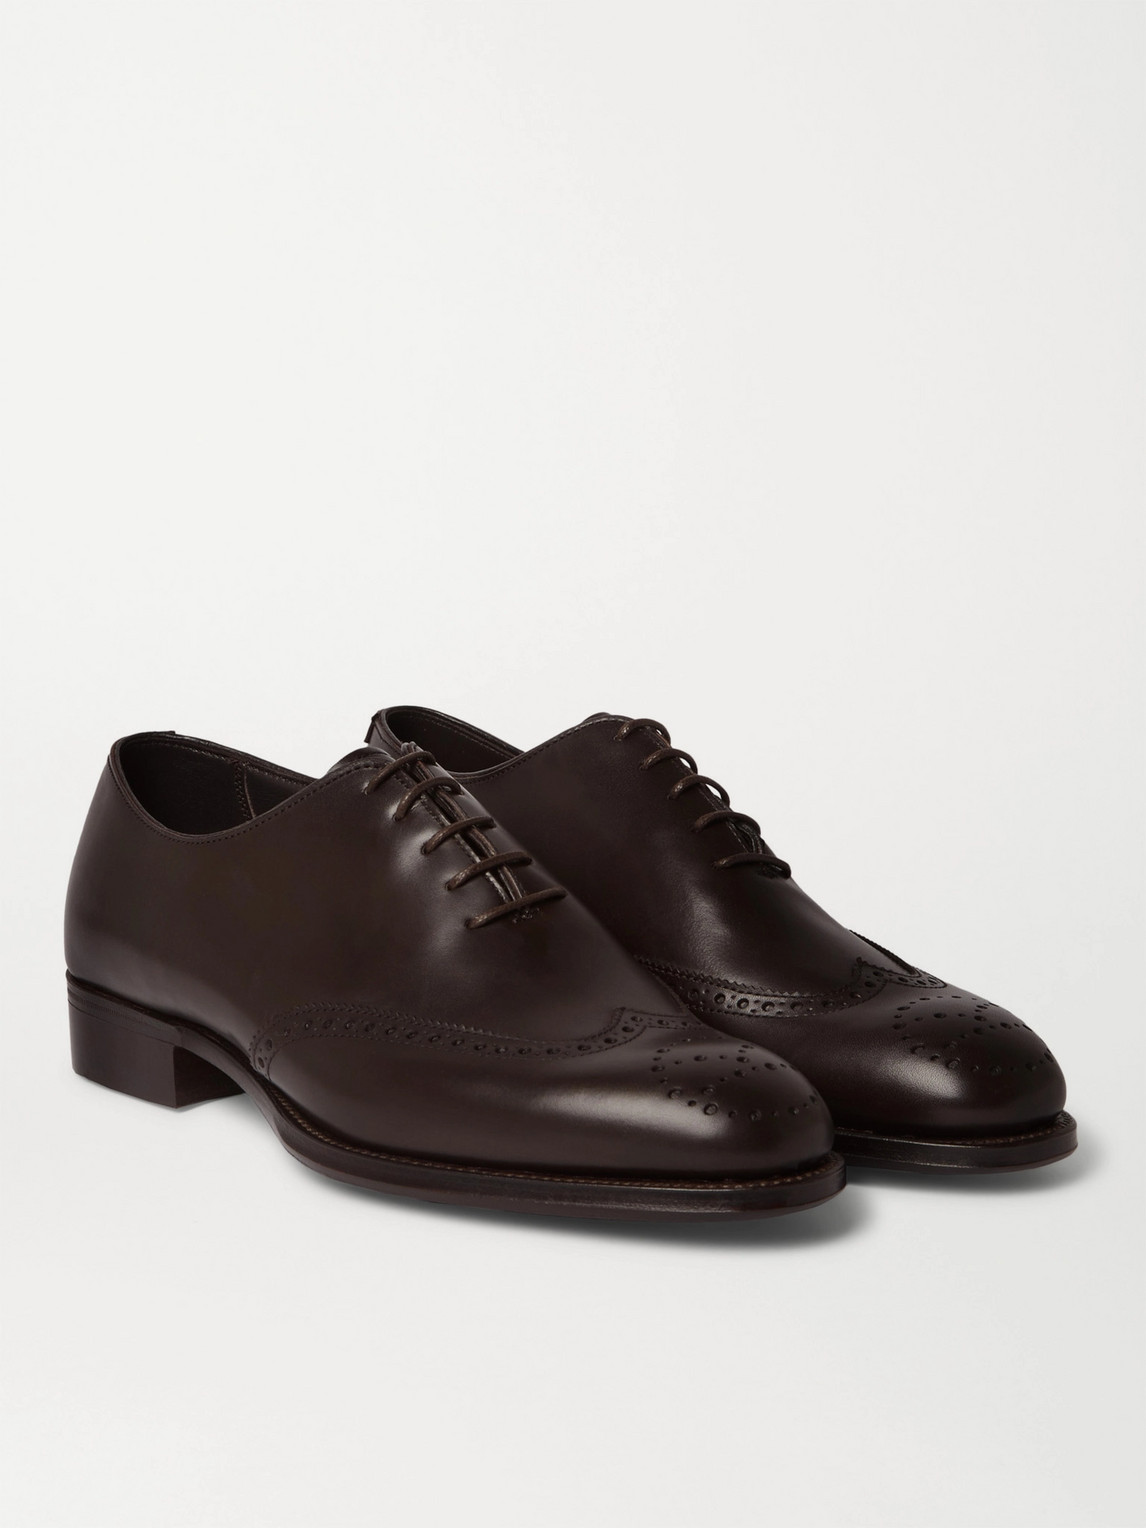 Kingsman George Cleverley Leather Brogues In Brown